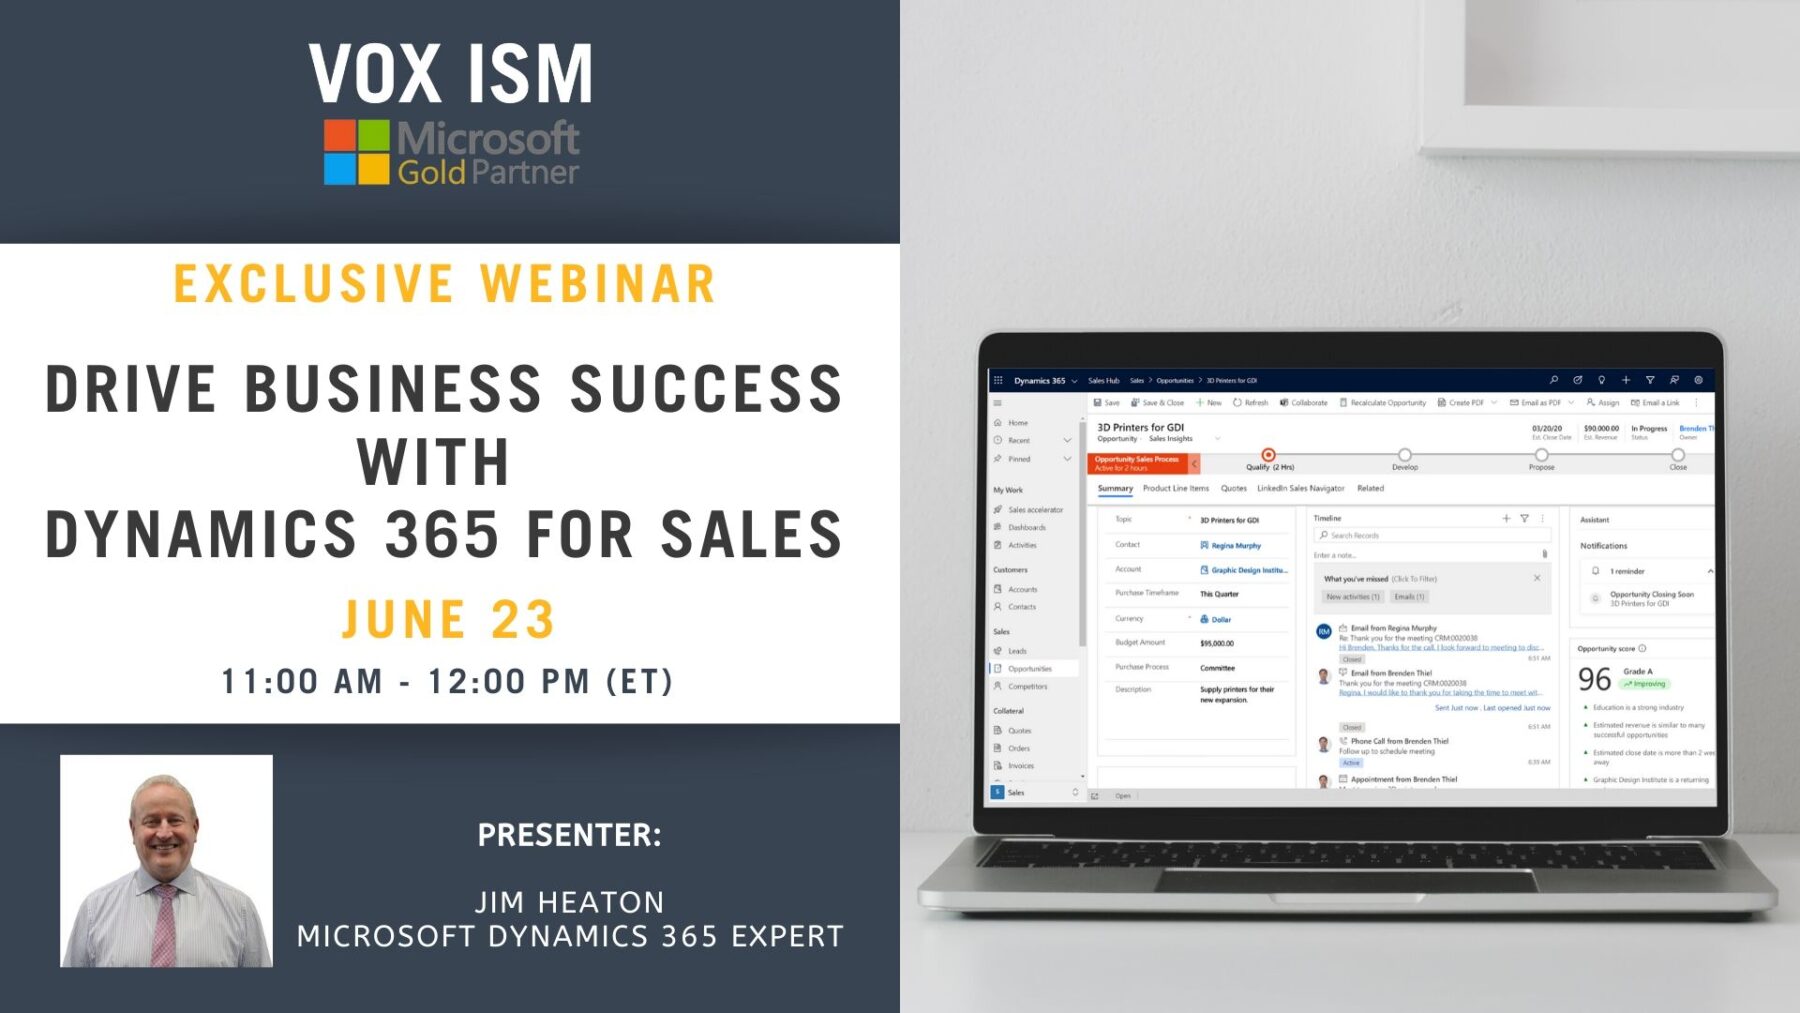 Drive Business Success with Dynamics 365 for Sales - June 23 - Webinar